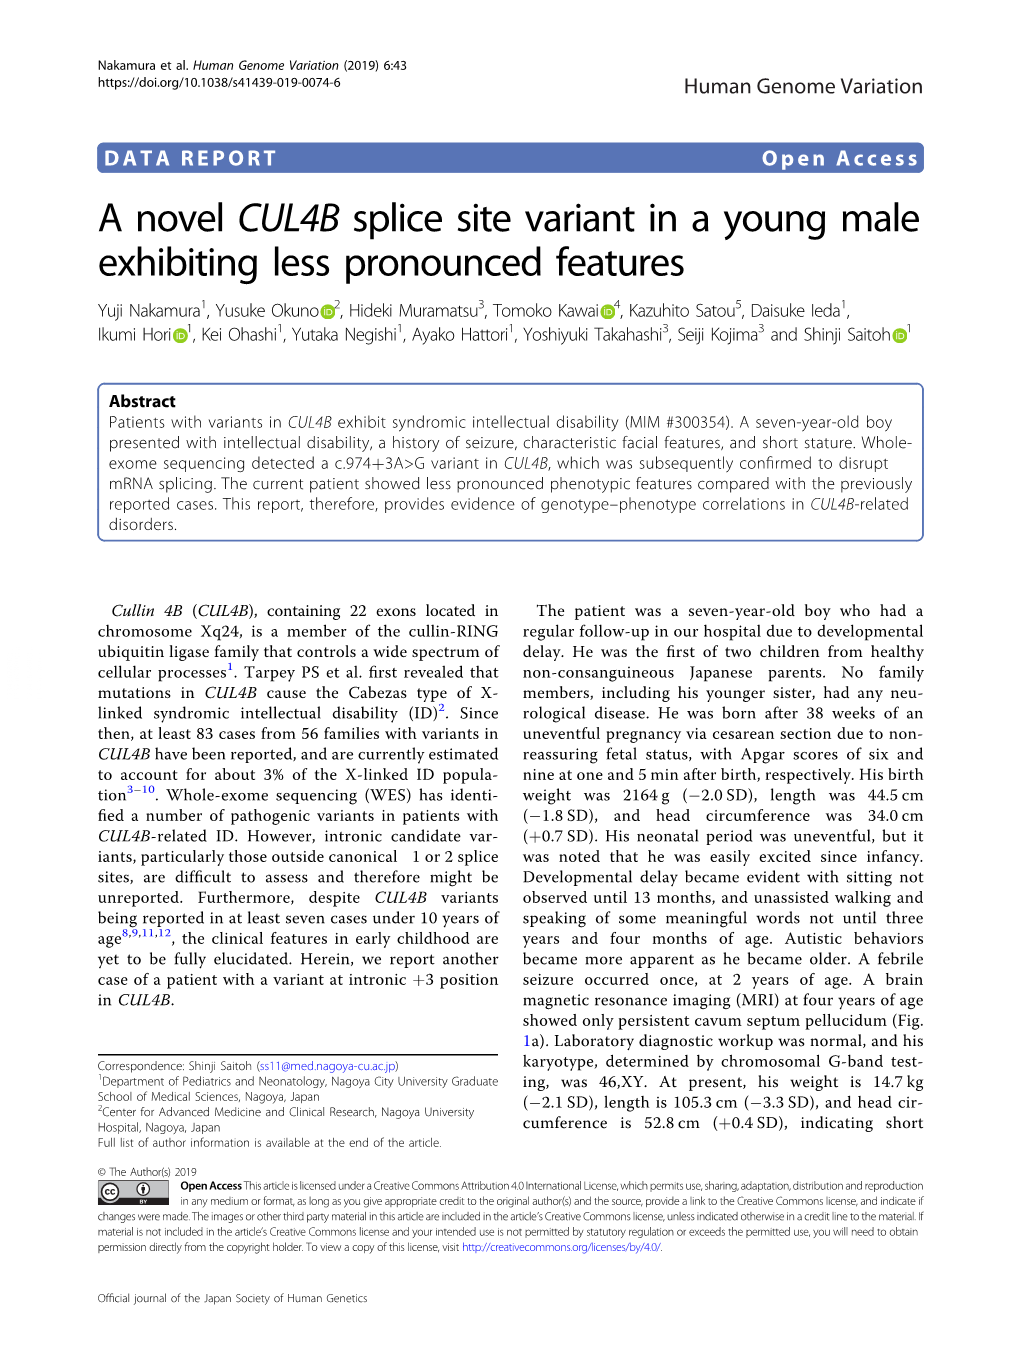 A Novel CUL4B Splice Site Variant in a Young Male Exhibiting Less